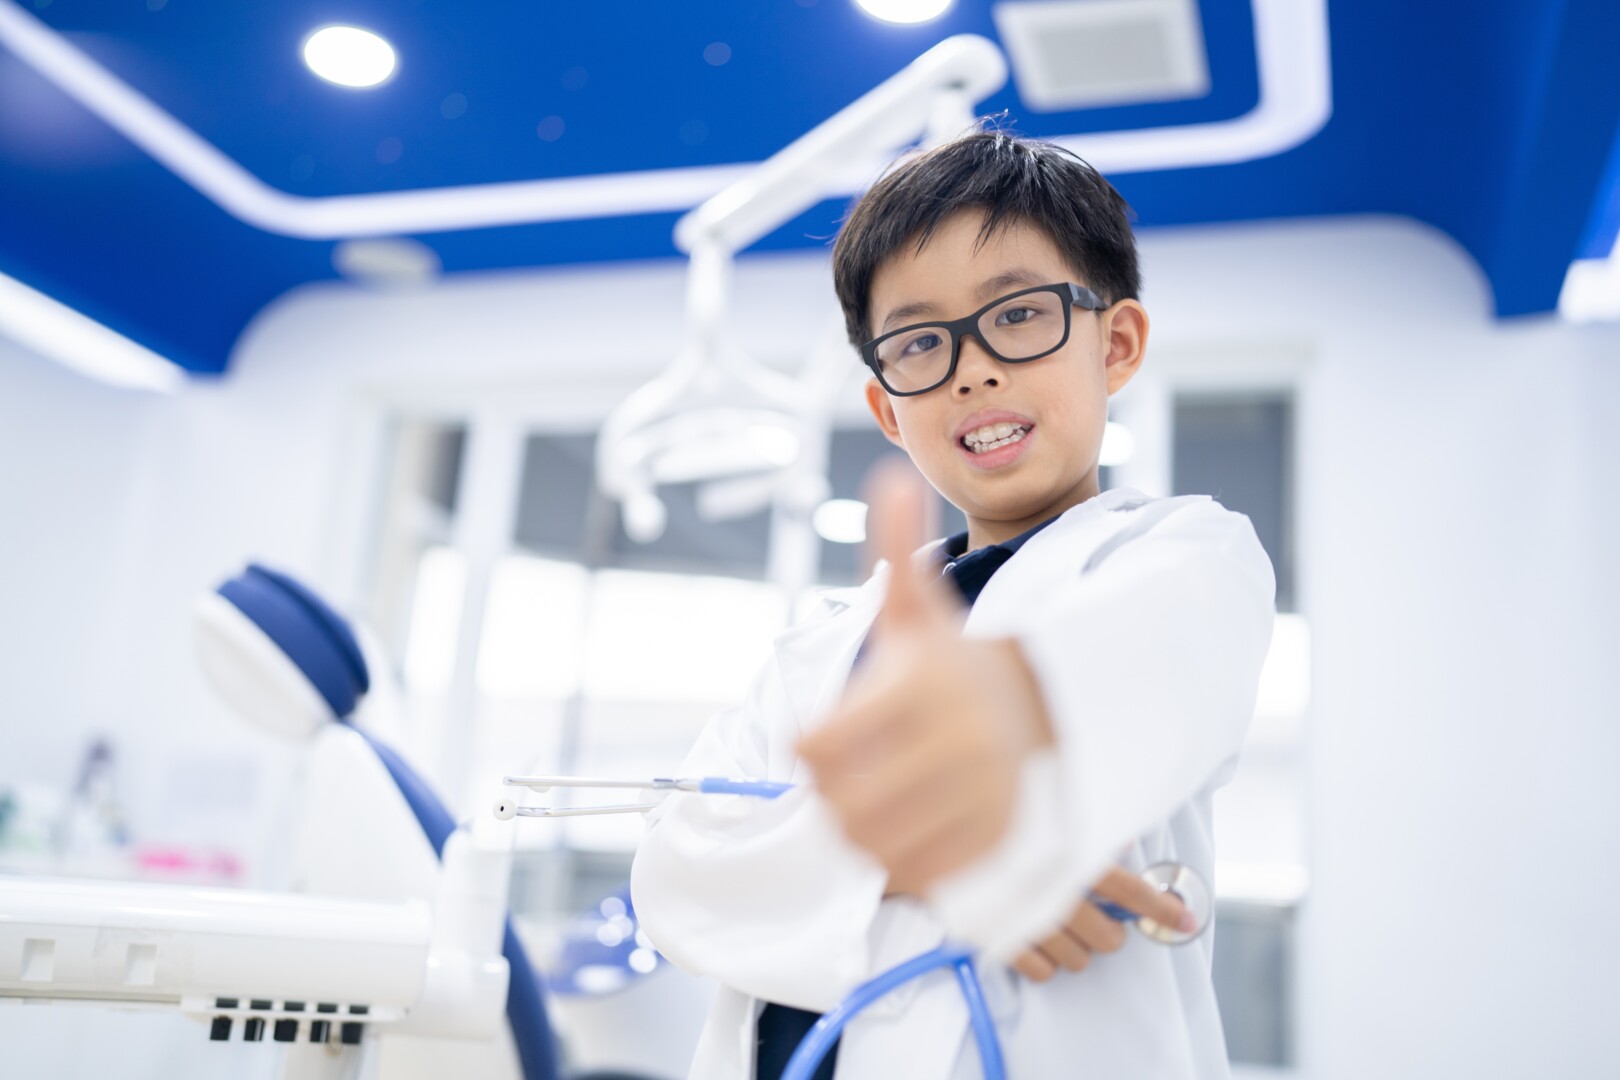 A young boy in glasses and a medical coat in a dental office aims a thumbs up at the camera.